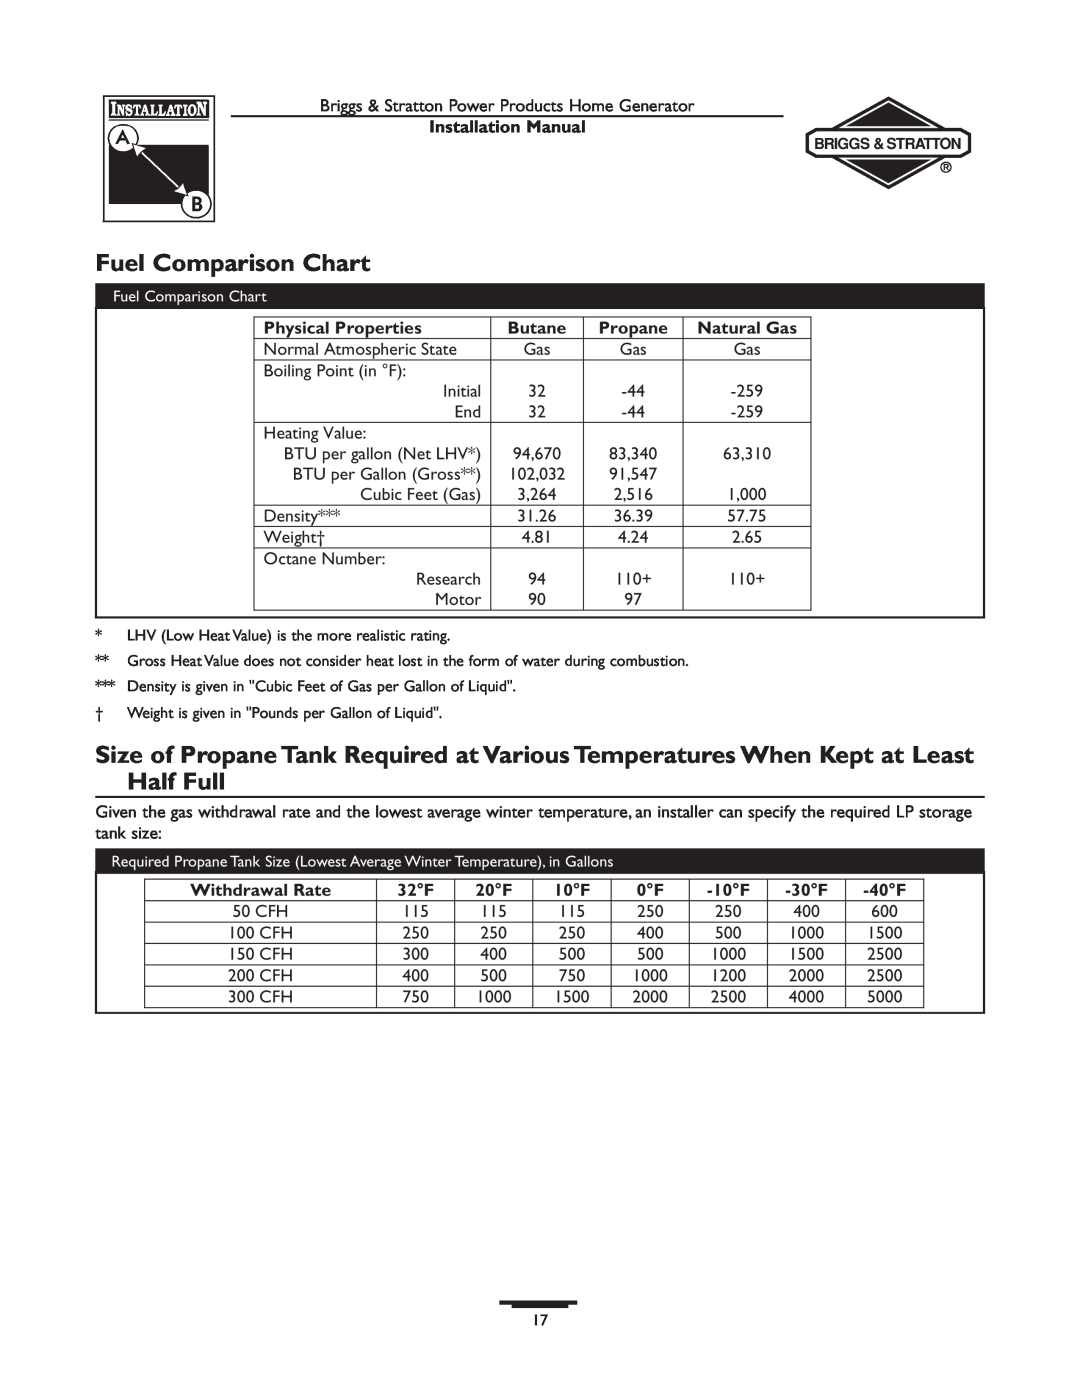 Briggs & Stratton 01815-0 manual Fuel Comparison Chart, Physical Properties, Butane, Propane, Natural Gas, Withdrawal Rate 